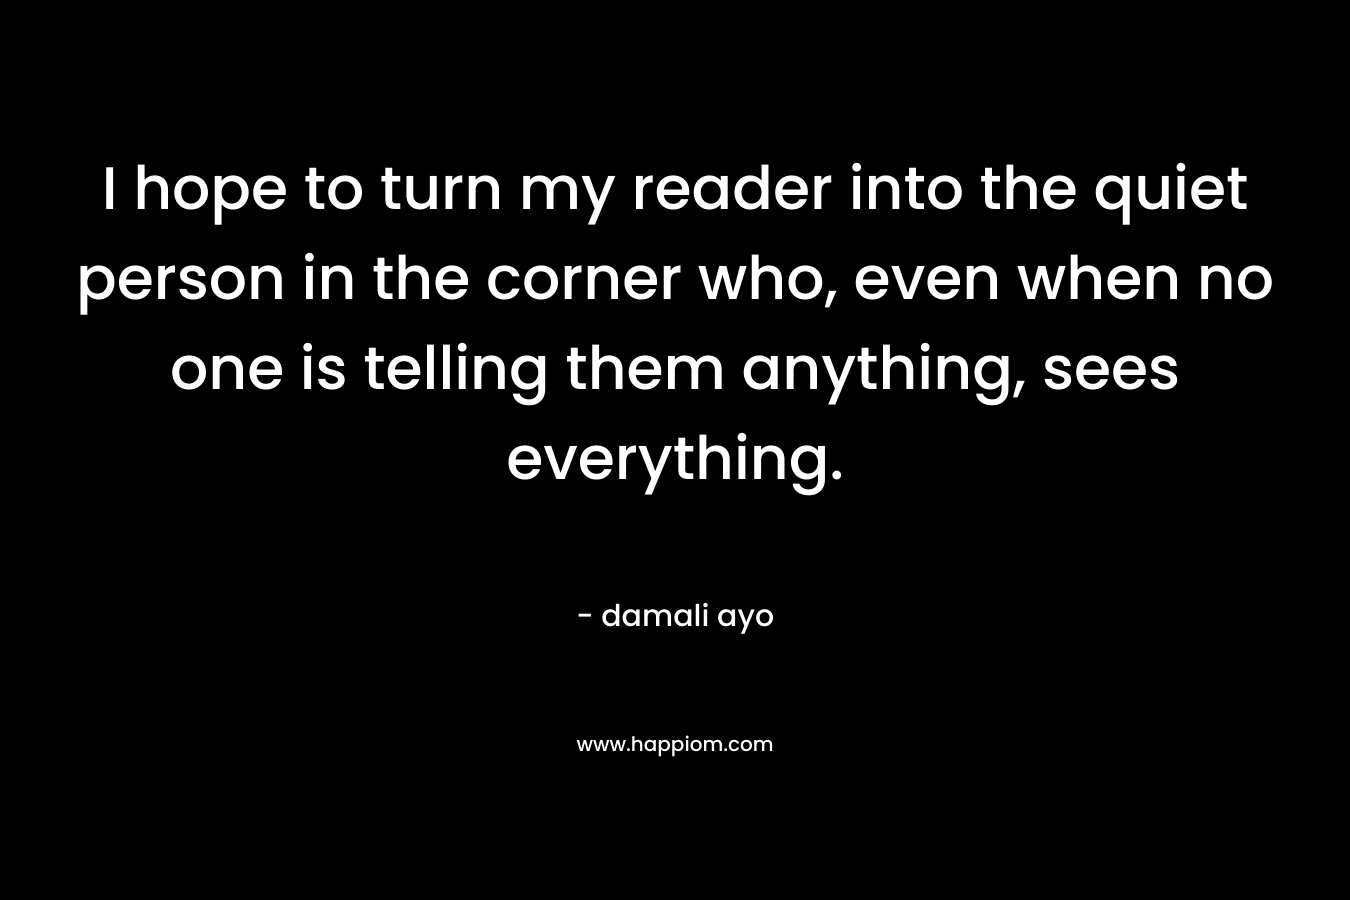 I hope to turn my reader into the quiet person in the corner who, even when no one is telling them anything, sees everything. – damali ayo